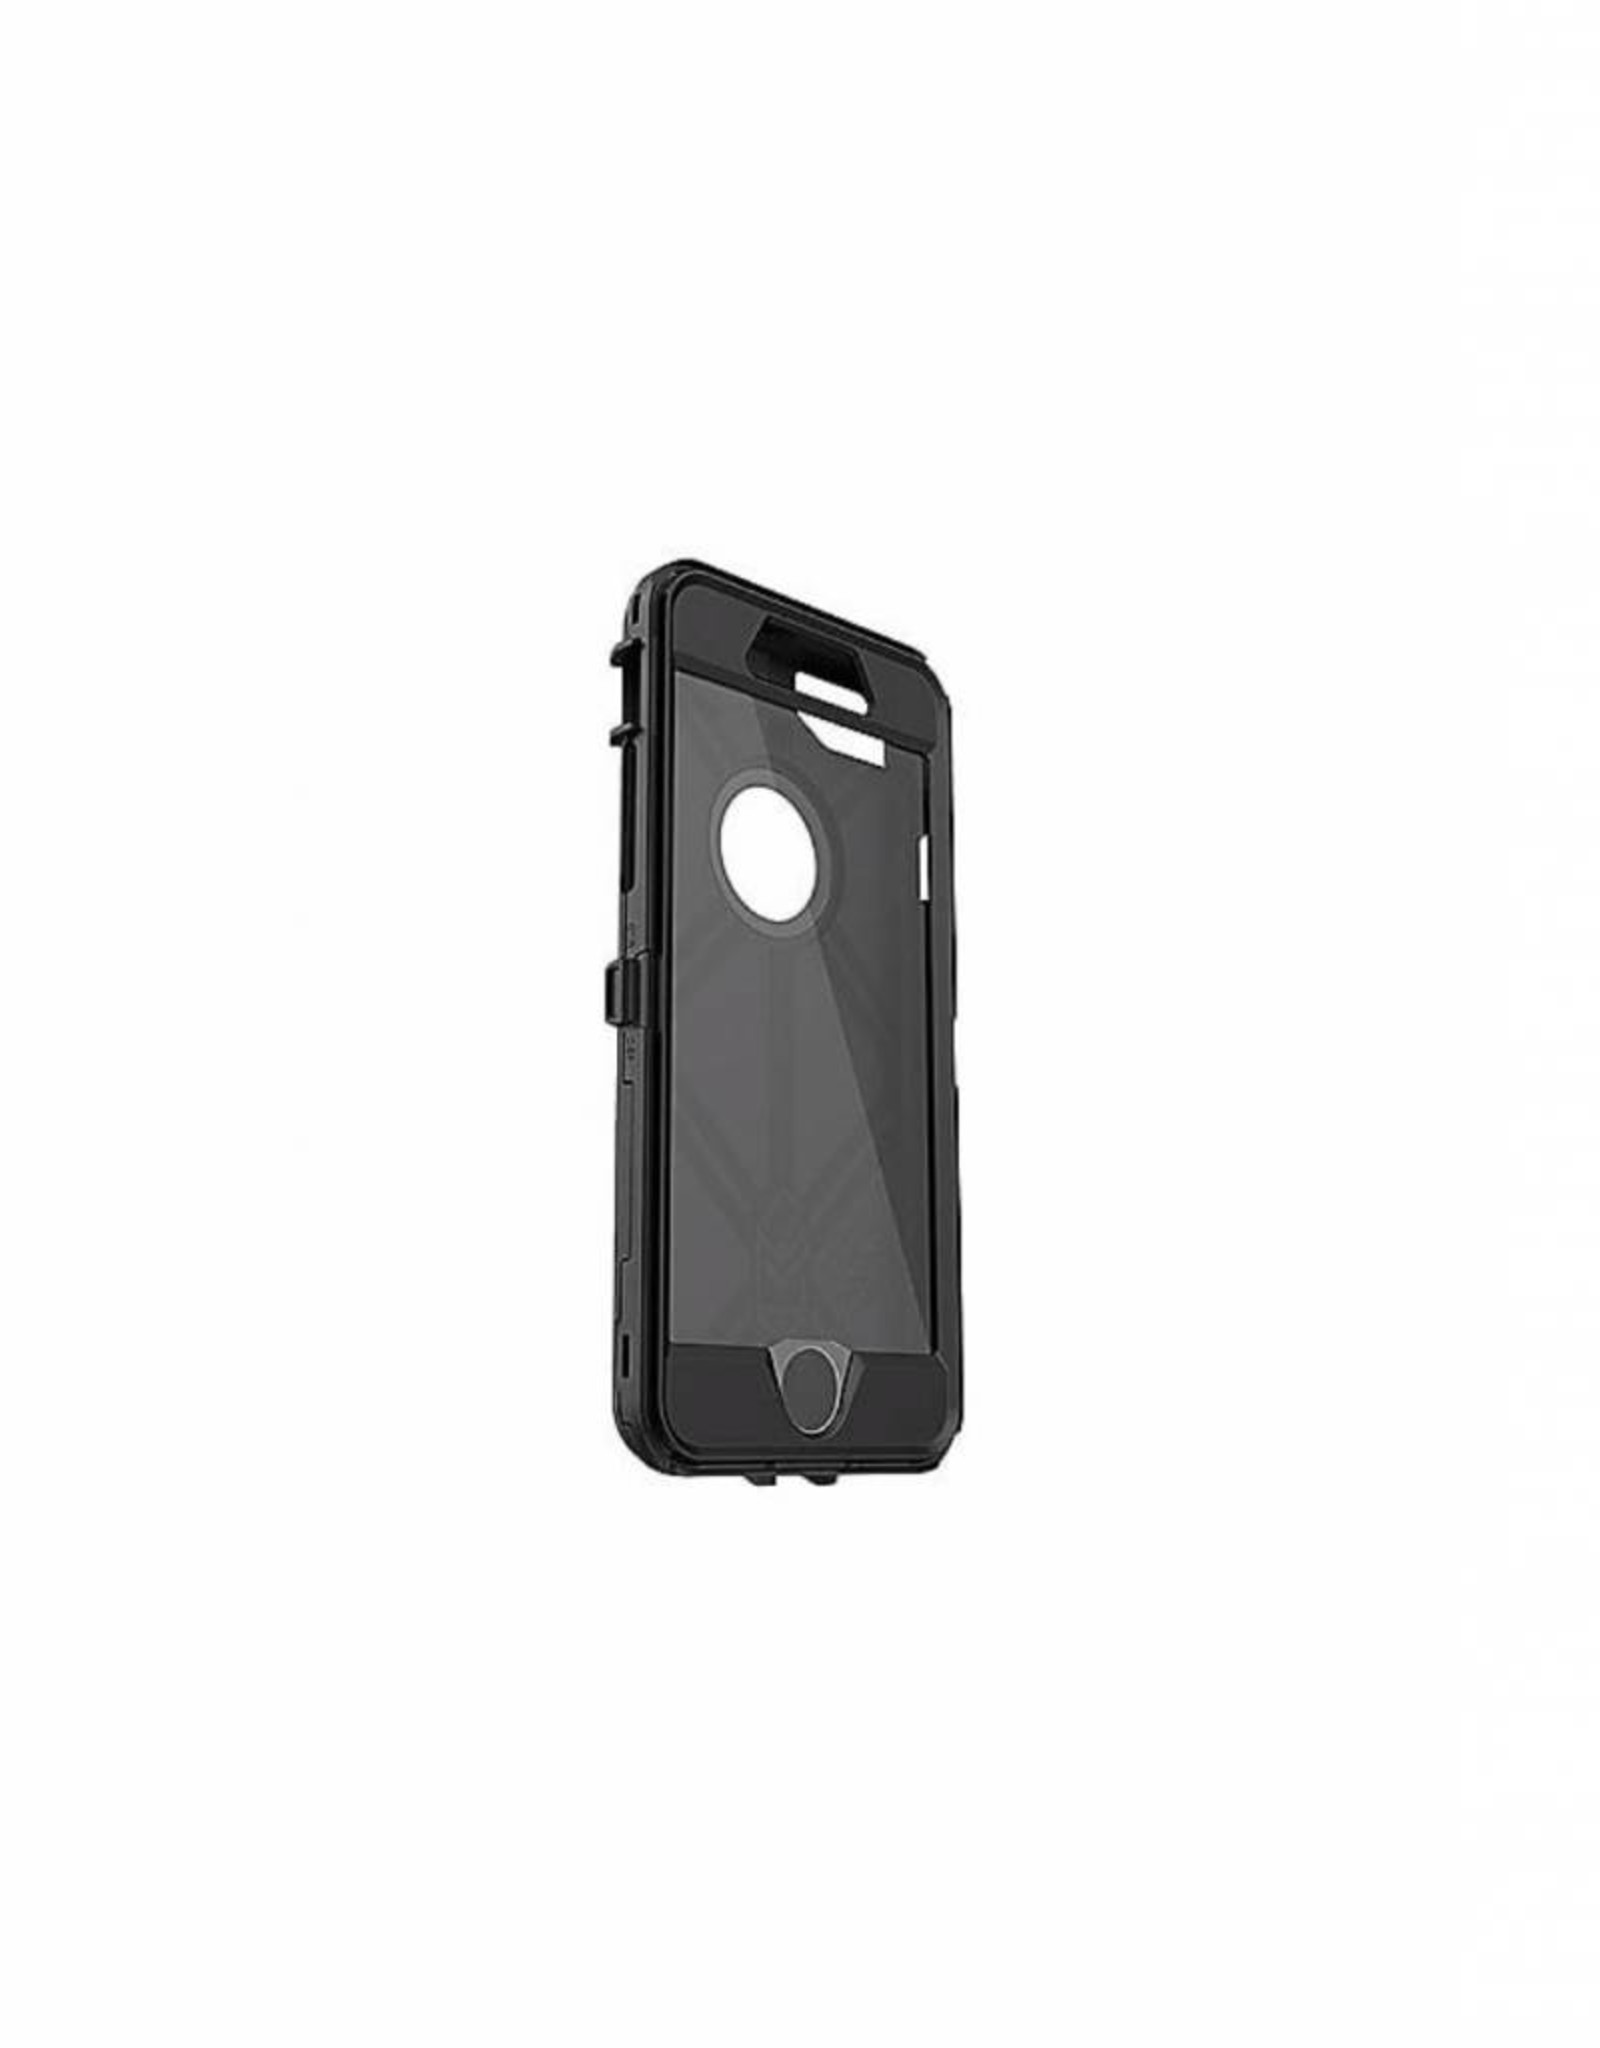 OTTERBOX OTTERBOX DEFENDER CASE (IPHONE 7/8)